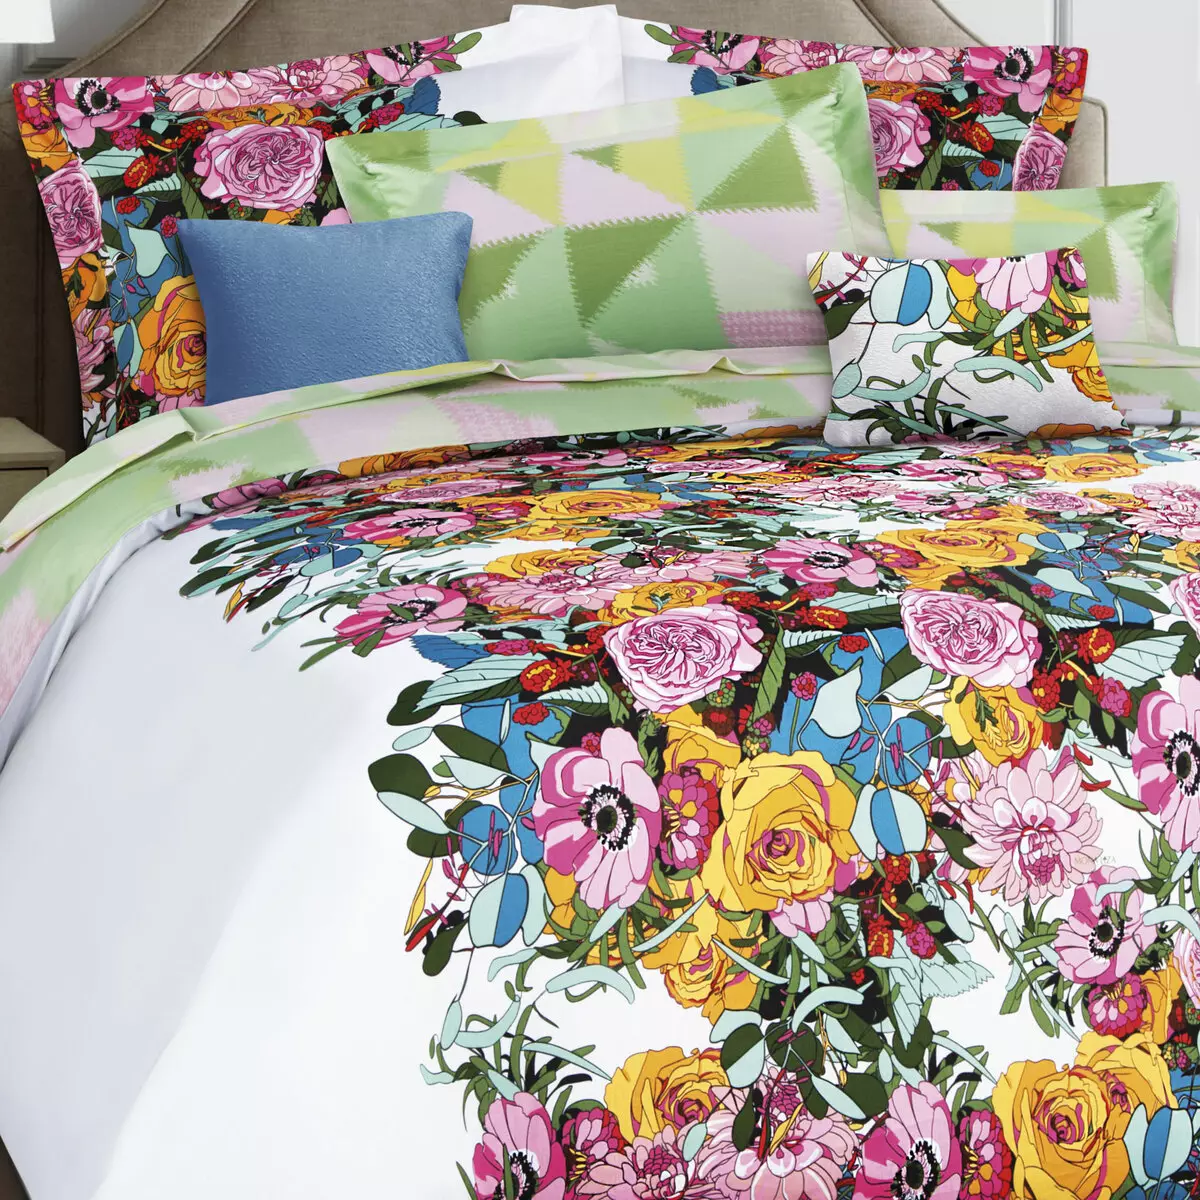 Bed linen MONA LIZA: Satin and Bosi kits, Euro and children's sets from the manufacturer, customer reviews 25829_41